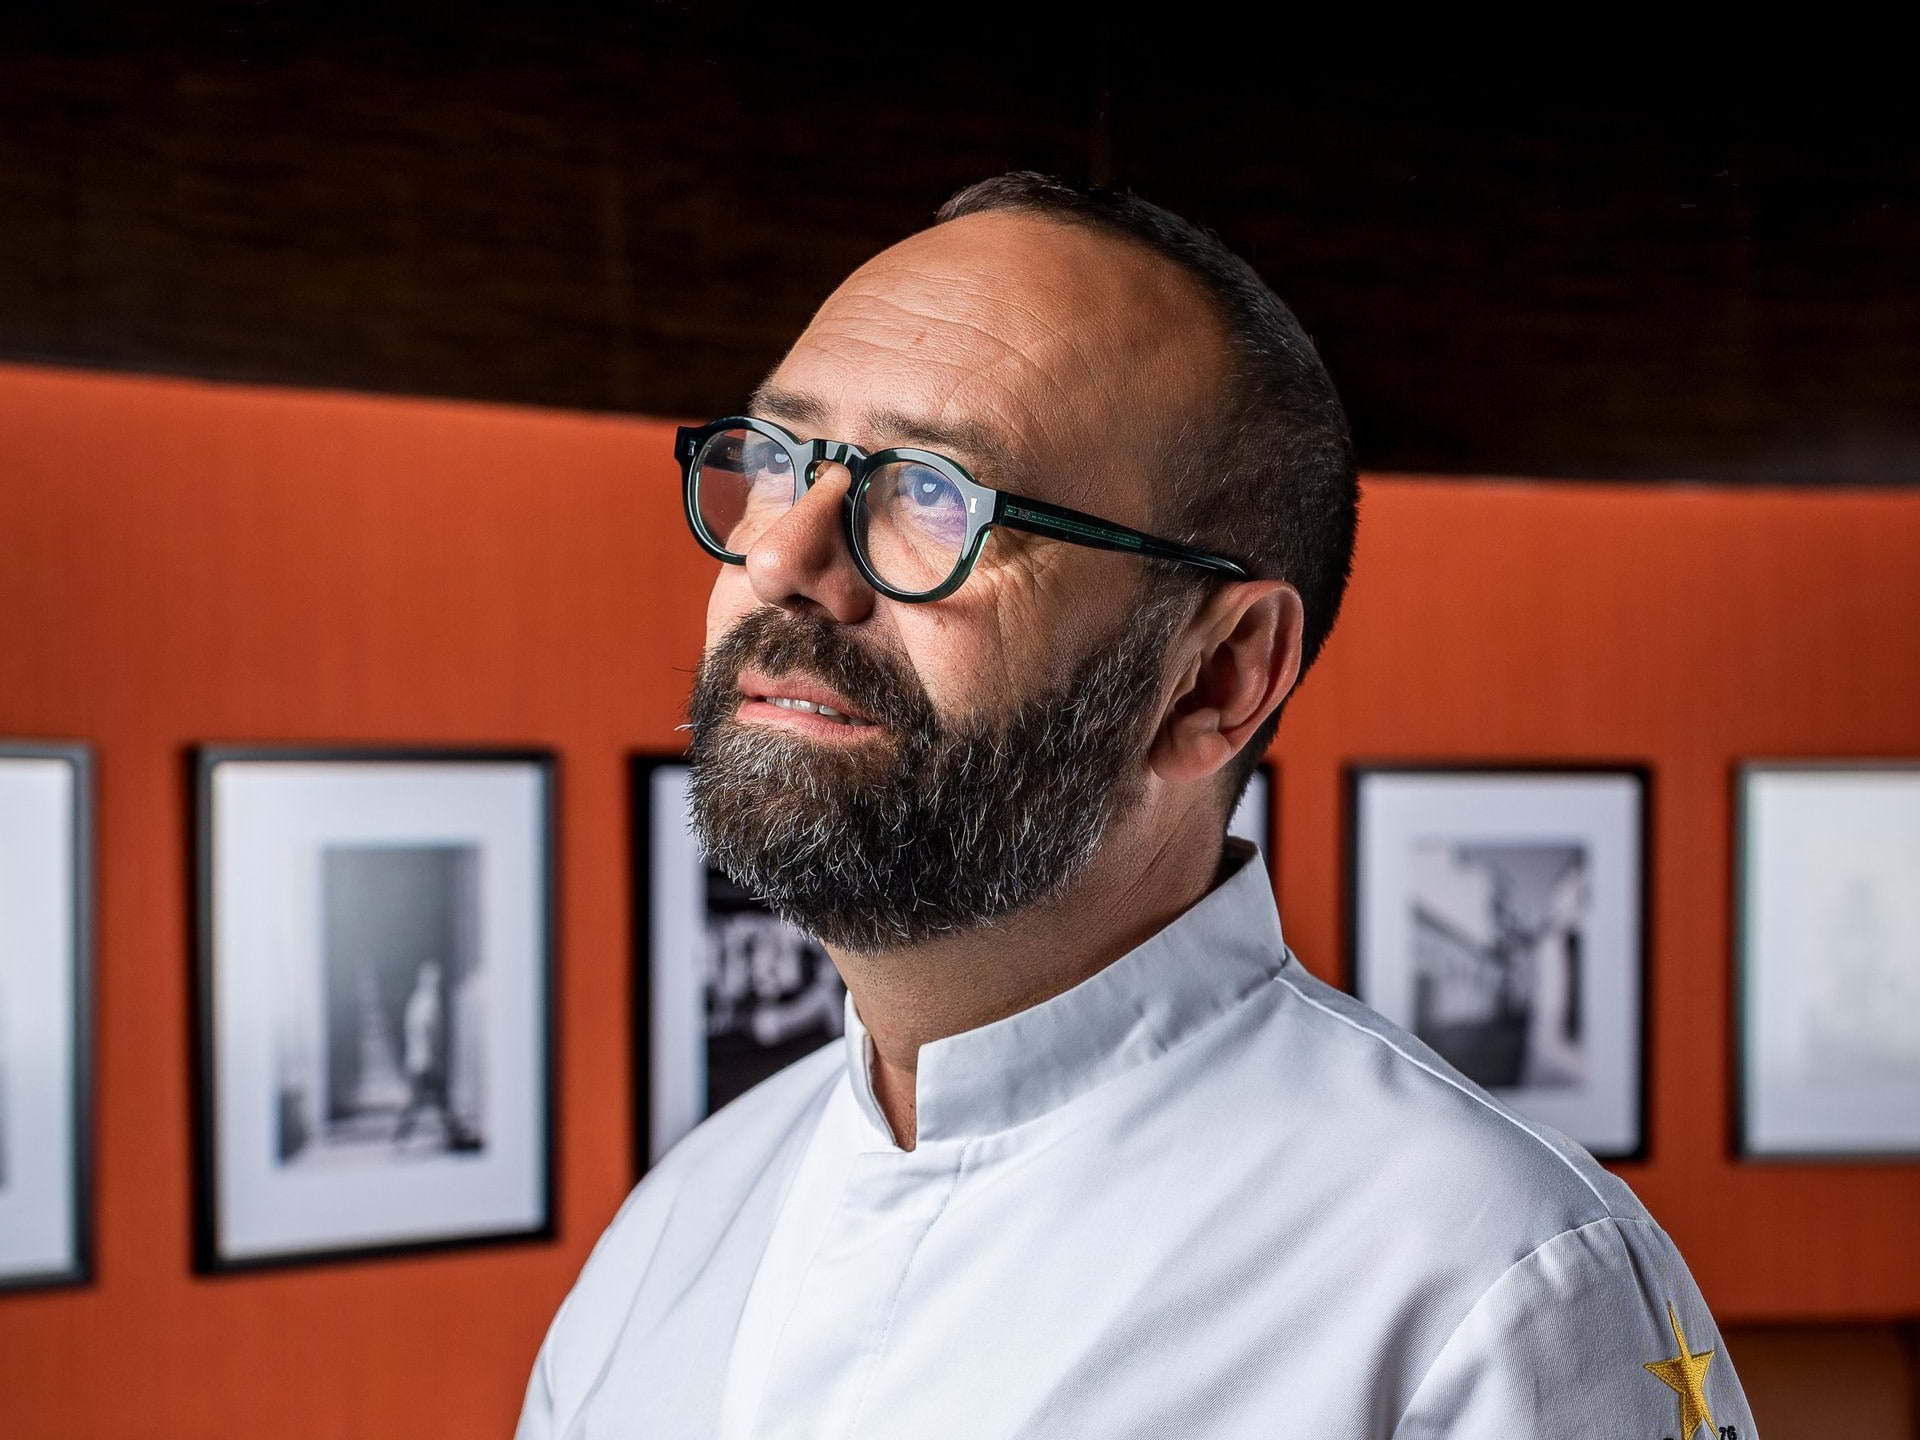 Pioneering Spanish chef José Pizarro is setting his eyes on breakfast with new opening